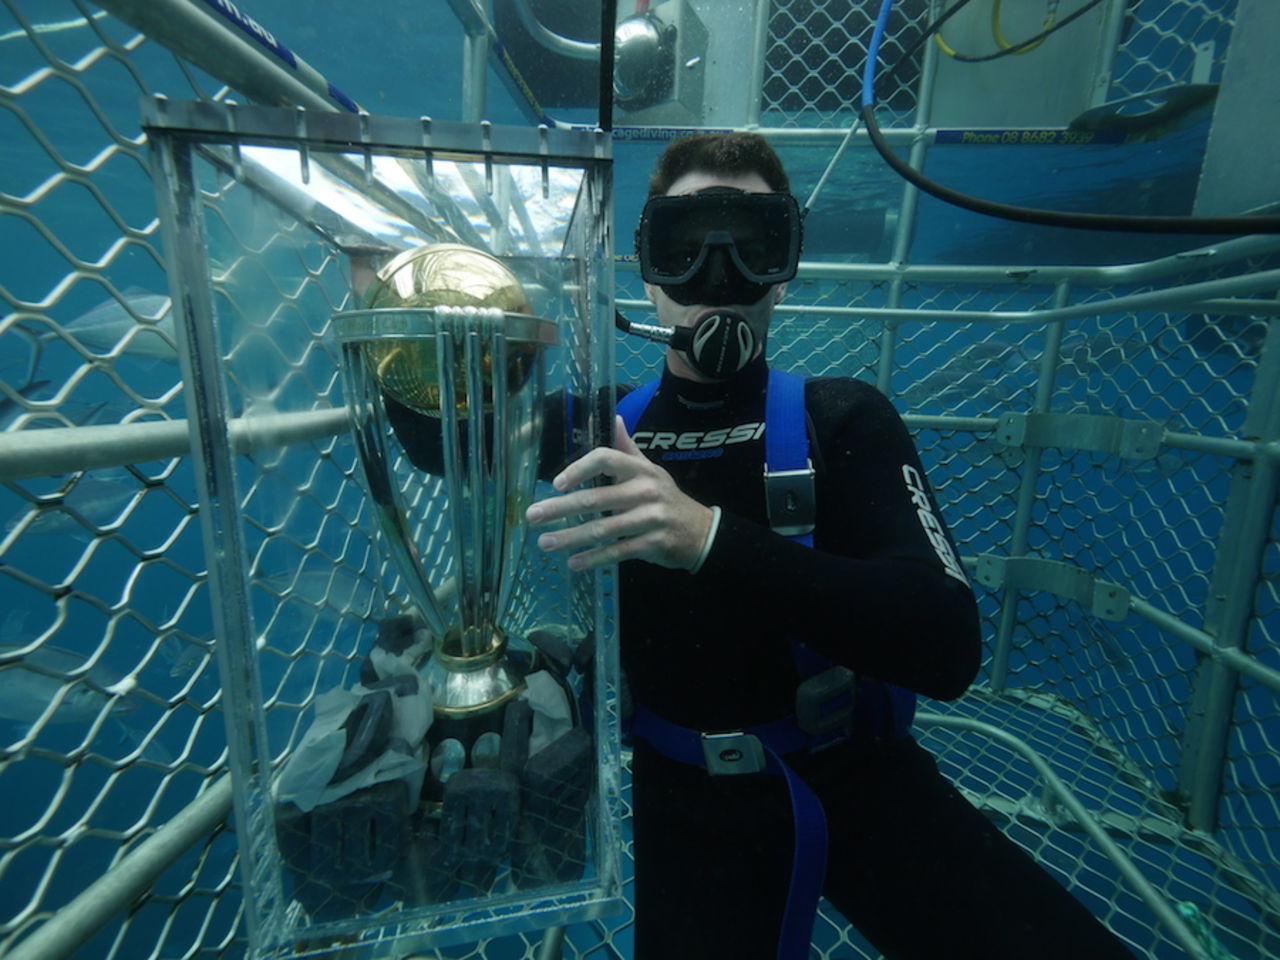 Shaun Tait took the World Cup trophy for the Great White Shark Dive, Port Lincoln, November 23, 2014